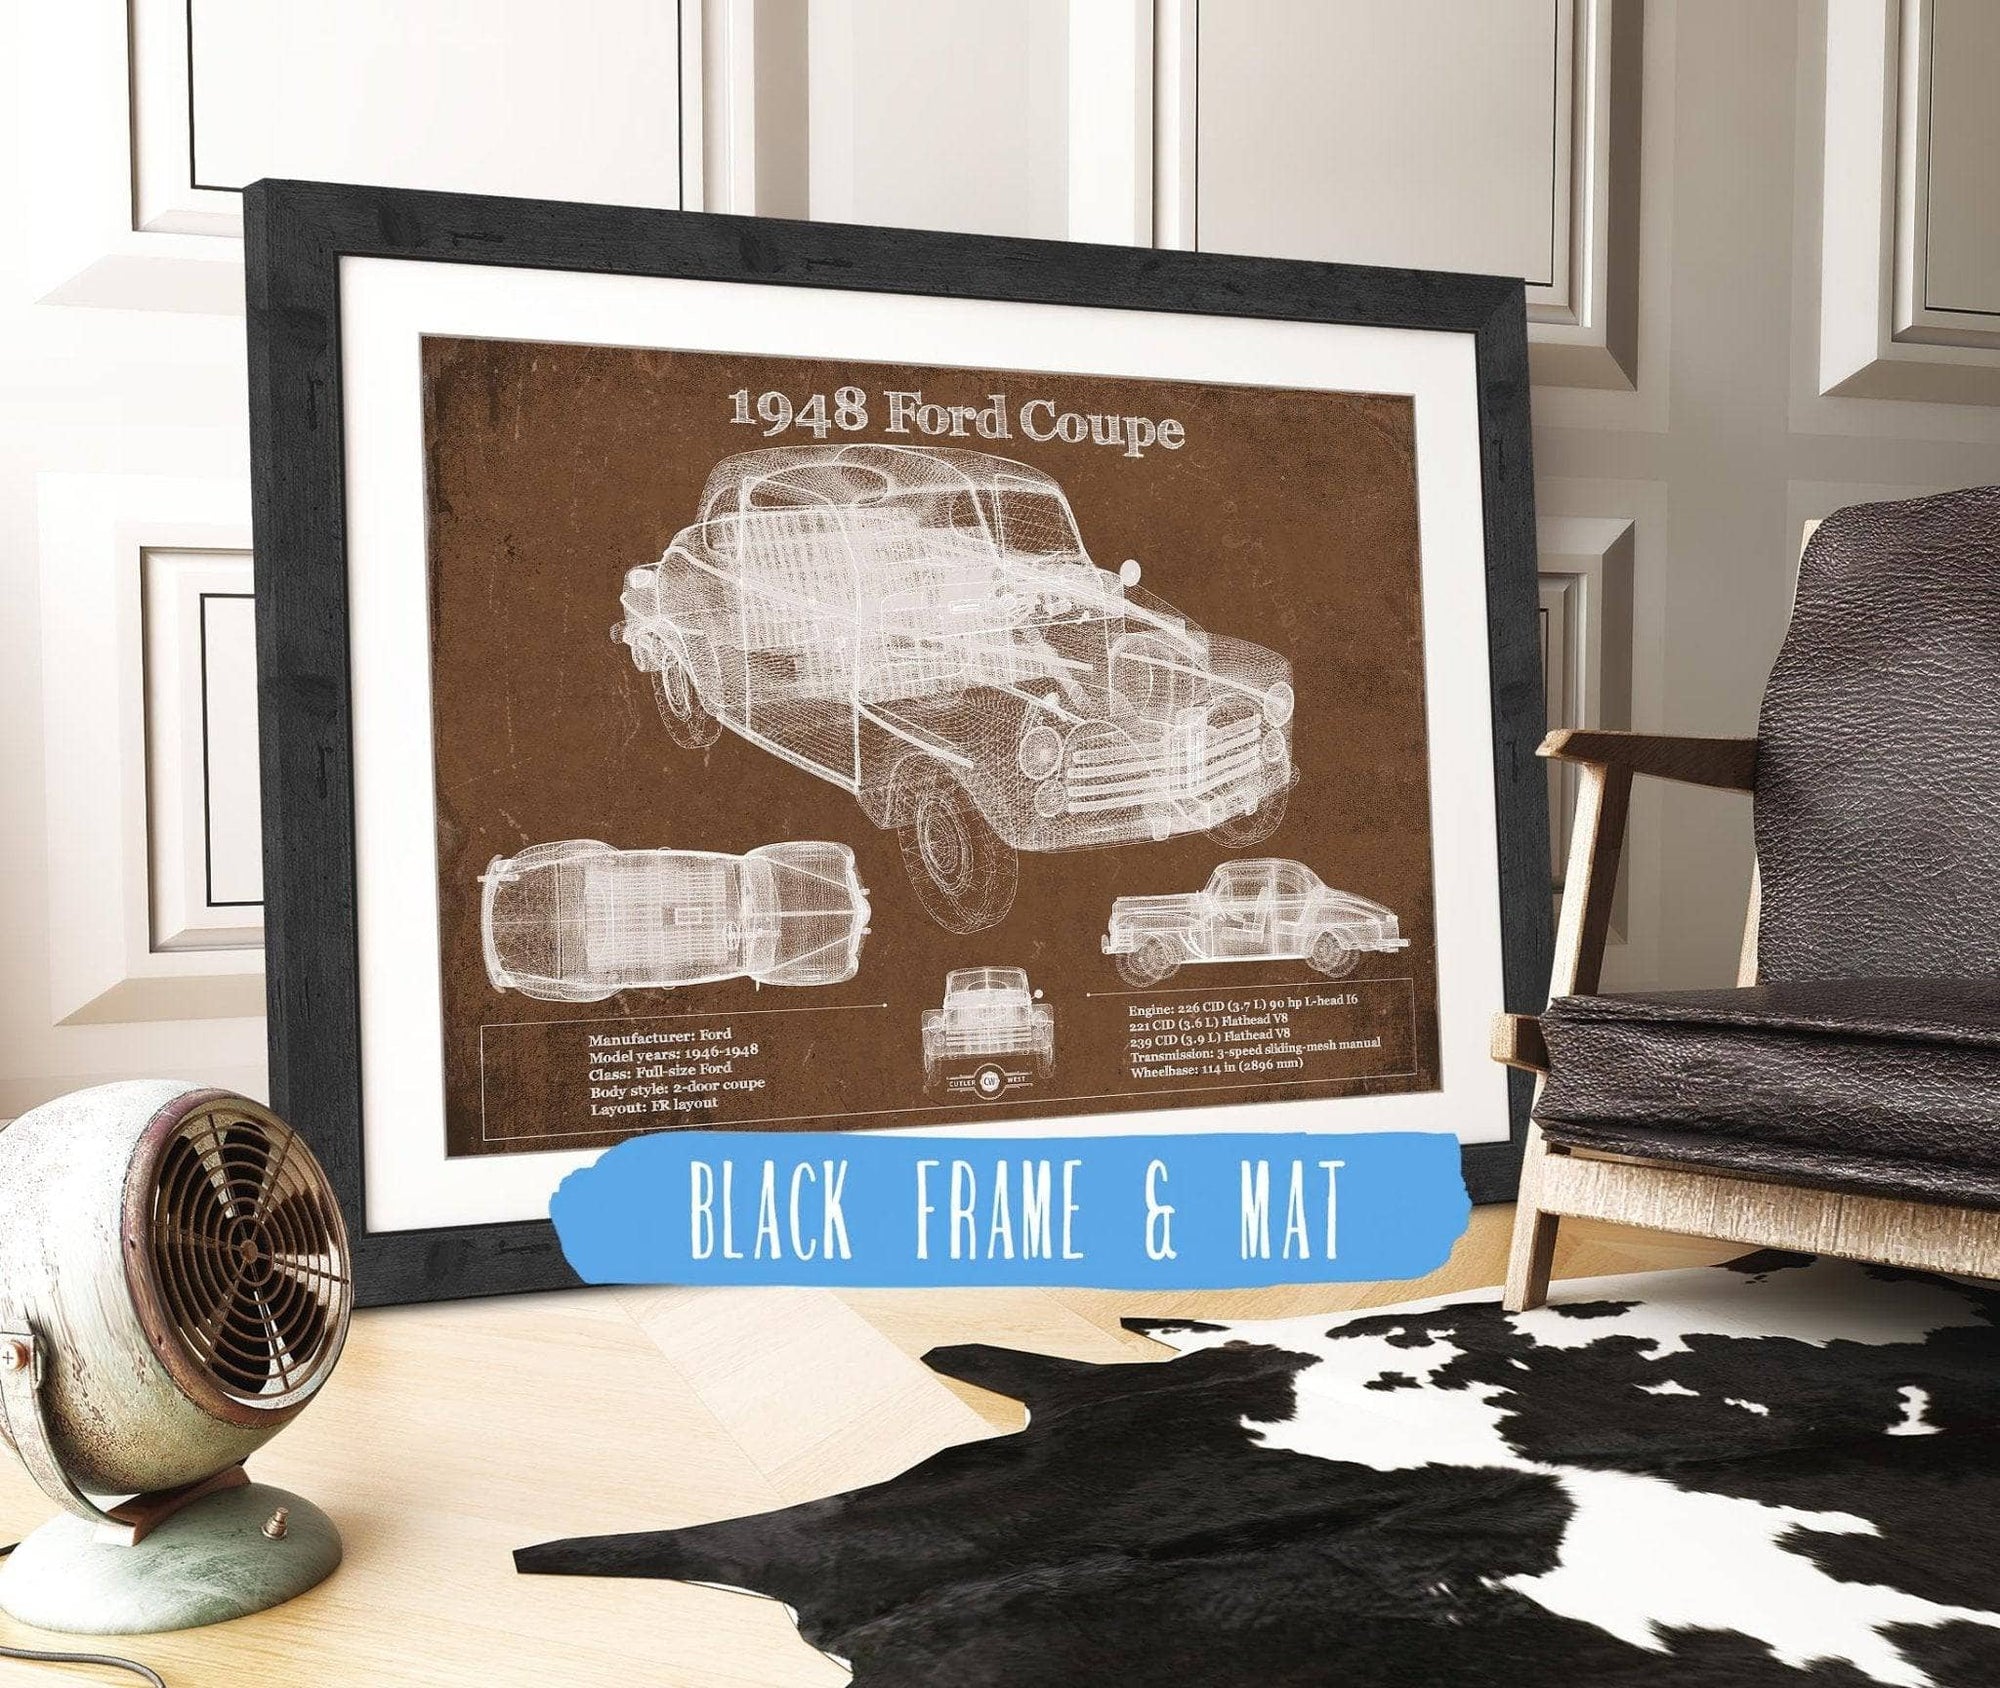 Cutler West Ford Collection 14" x 11" / Black Frame & Mat 1948 Ford Coupe Vintage Blueprint Auto Print 235353061